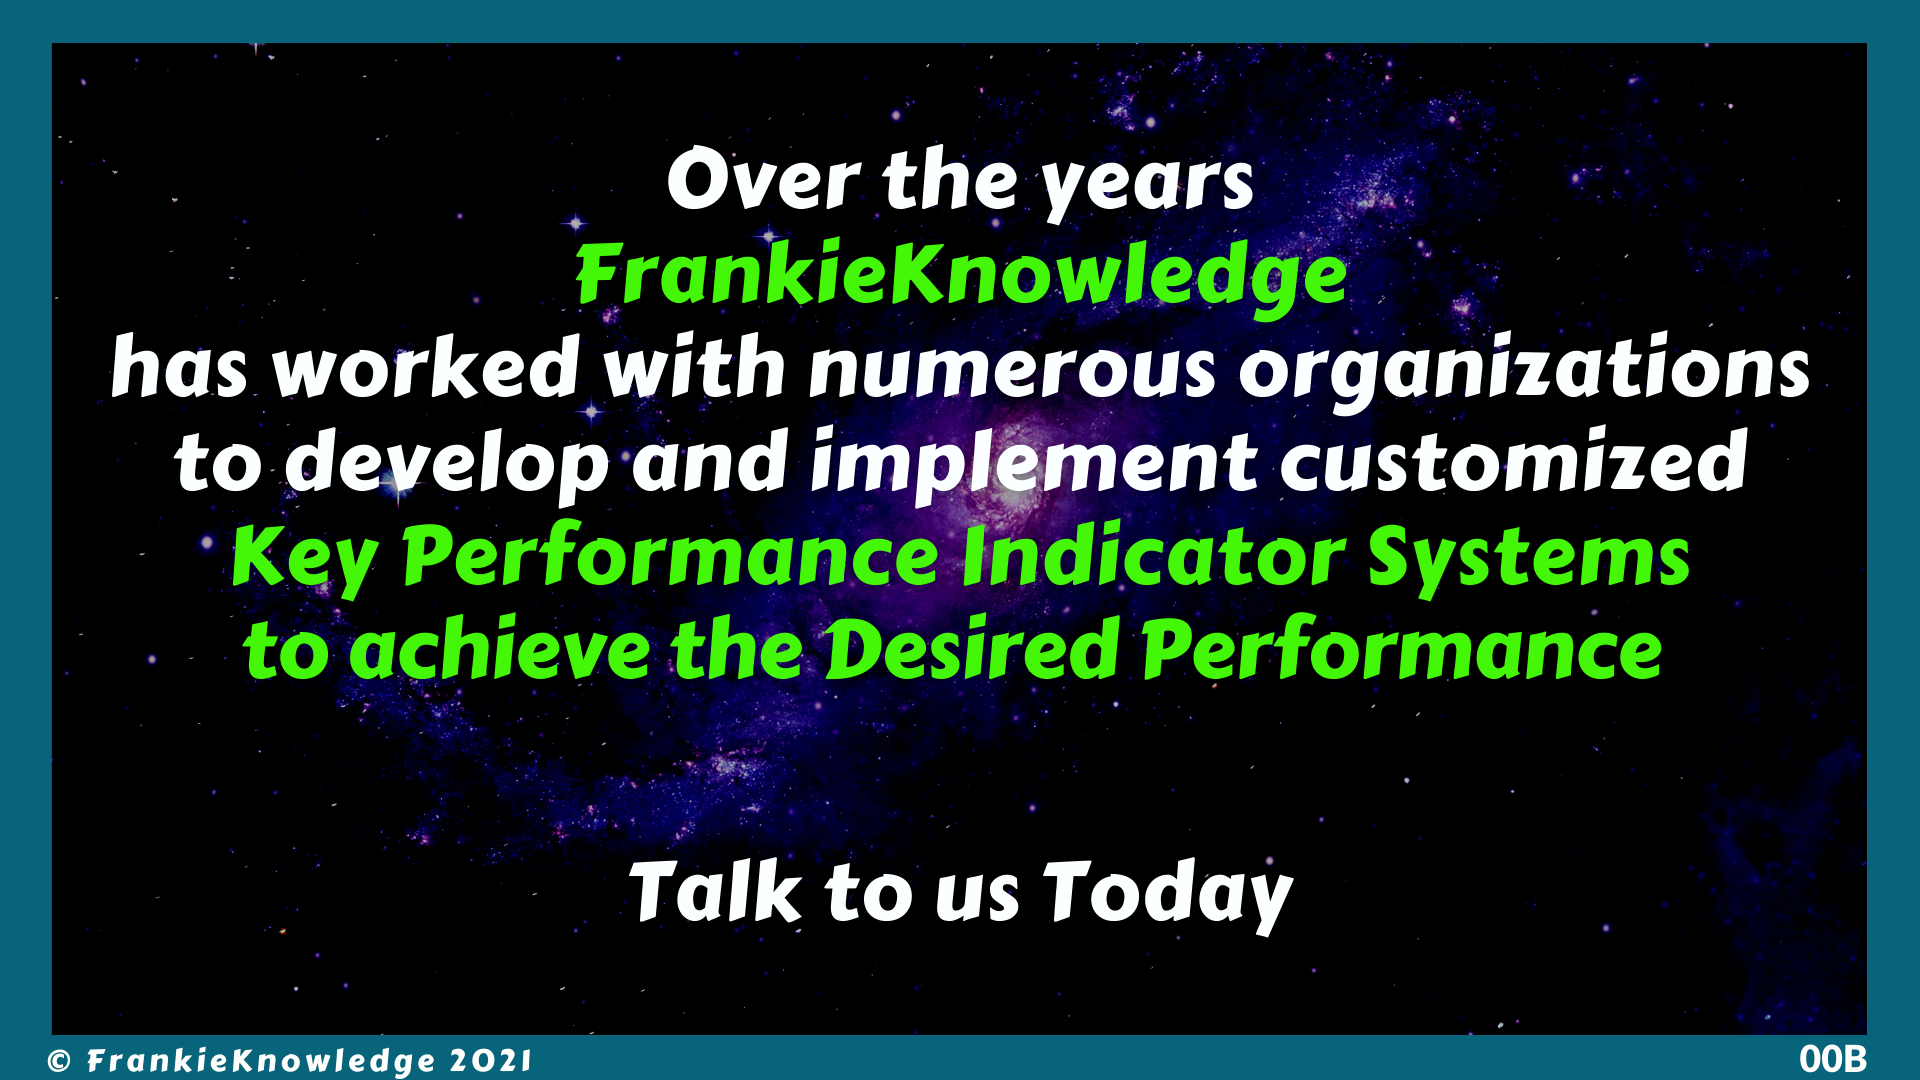 Over the years FrankieKnowledge has worked with numerous organizations to develop and implement customized Key Performance Indicator Systems to achieve the Desired Performance. Talk to FrankieKnowledge Today